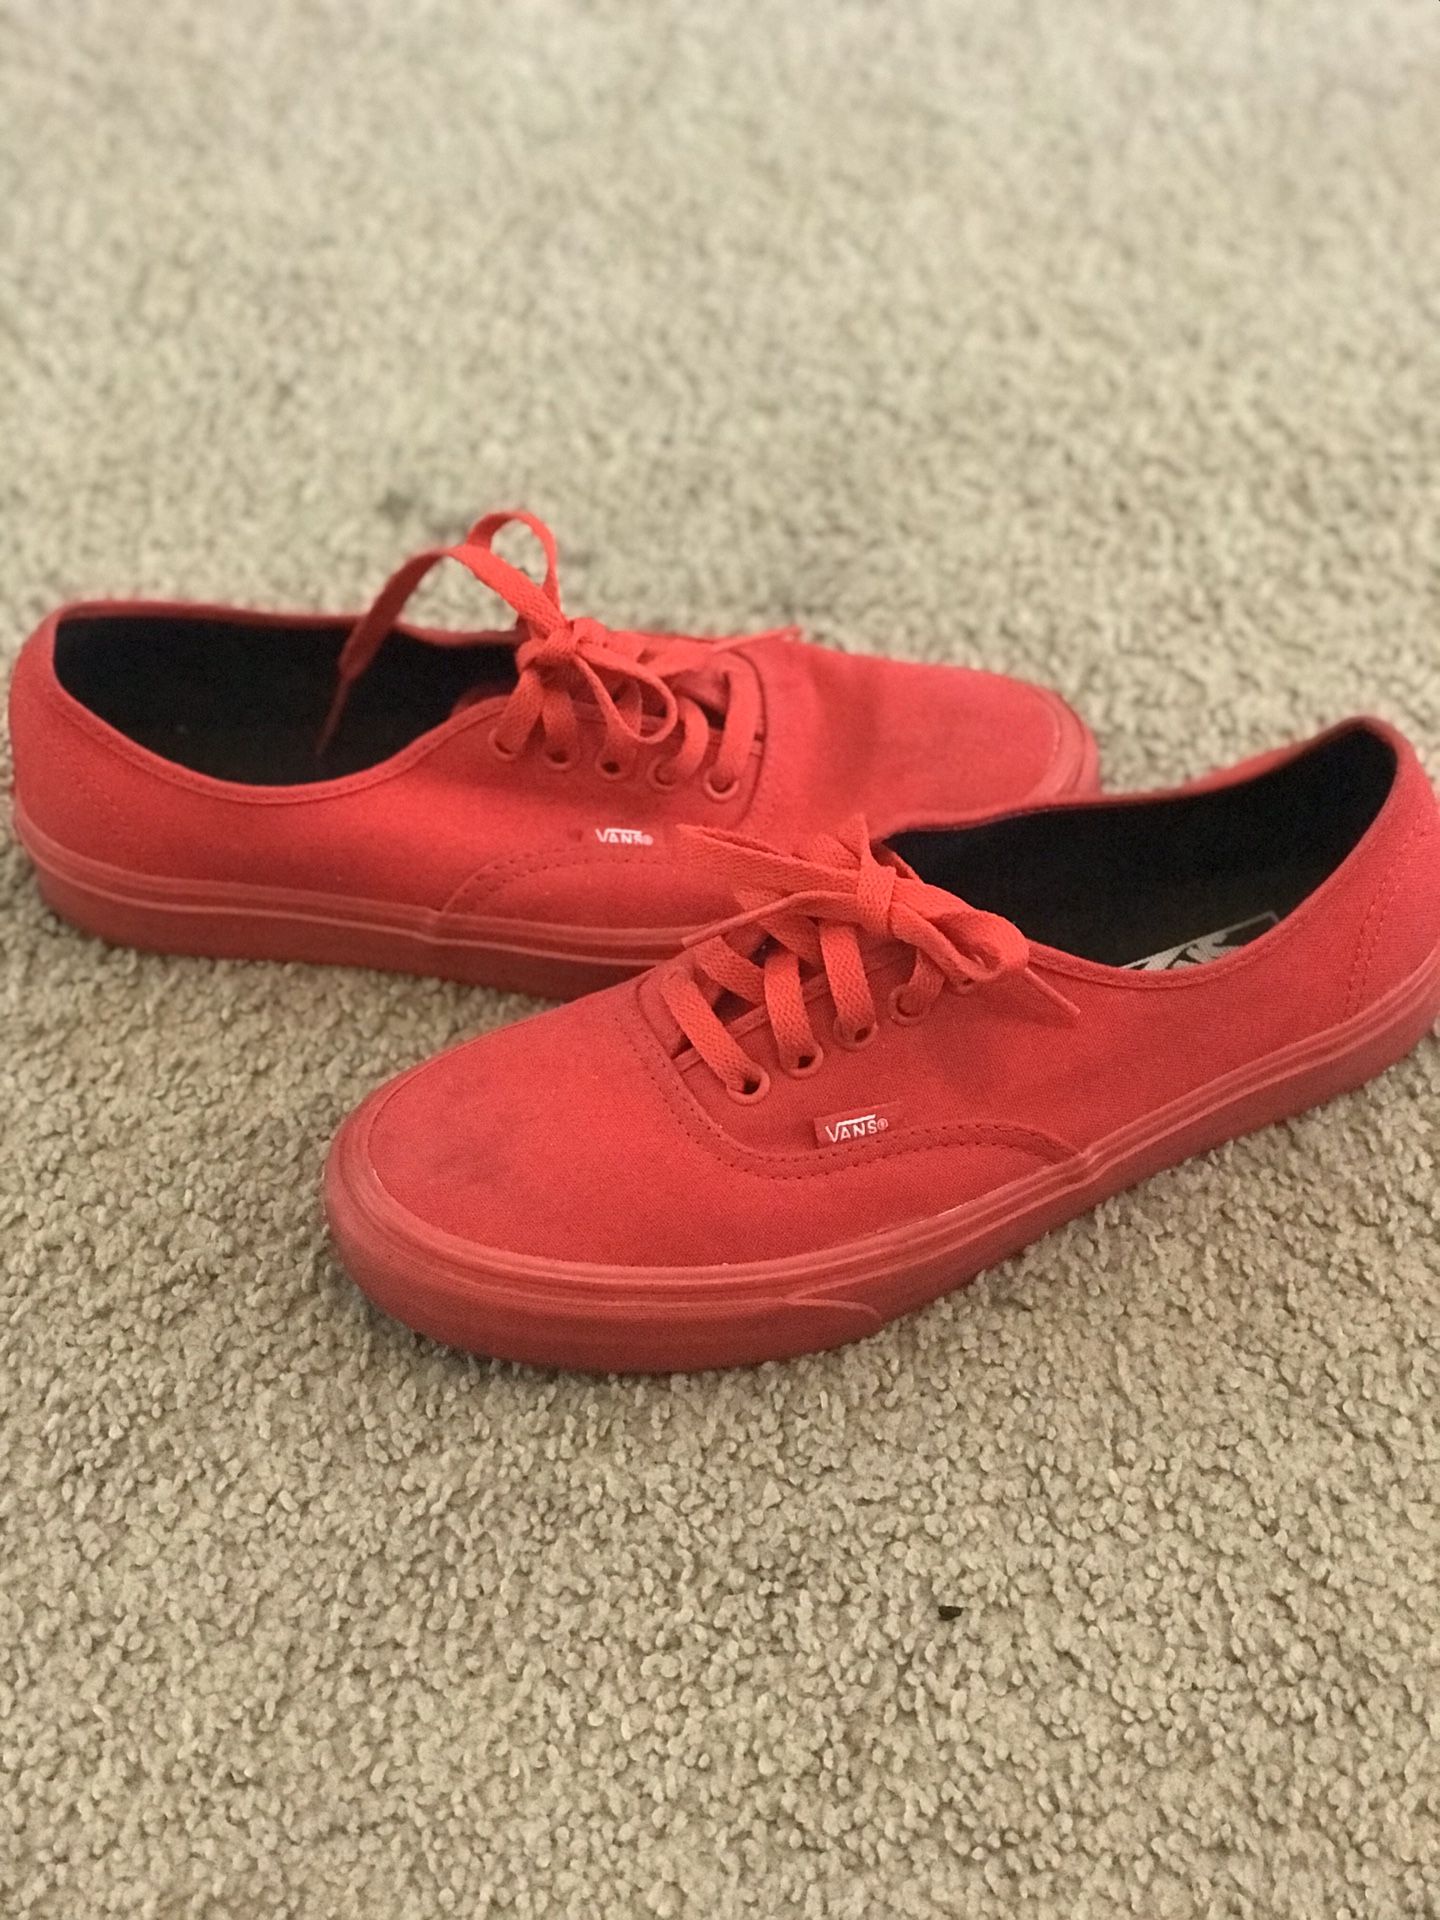 Vans all red size 9